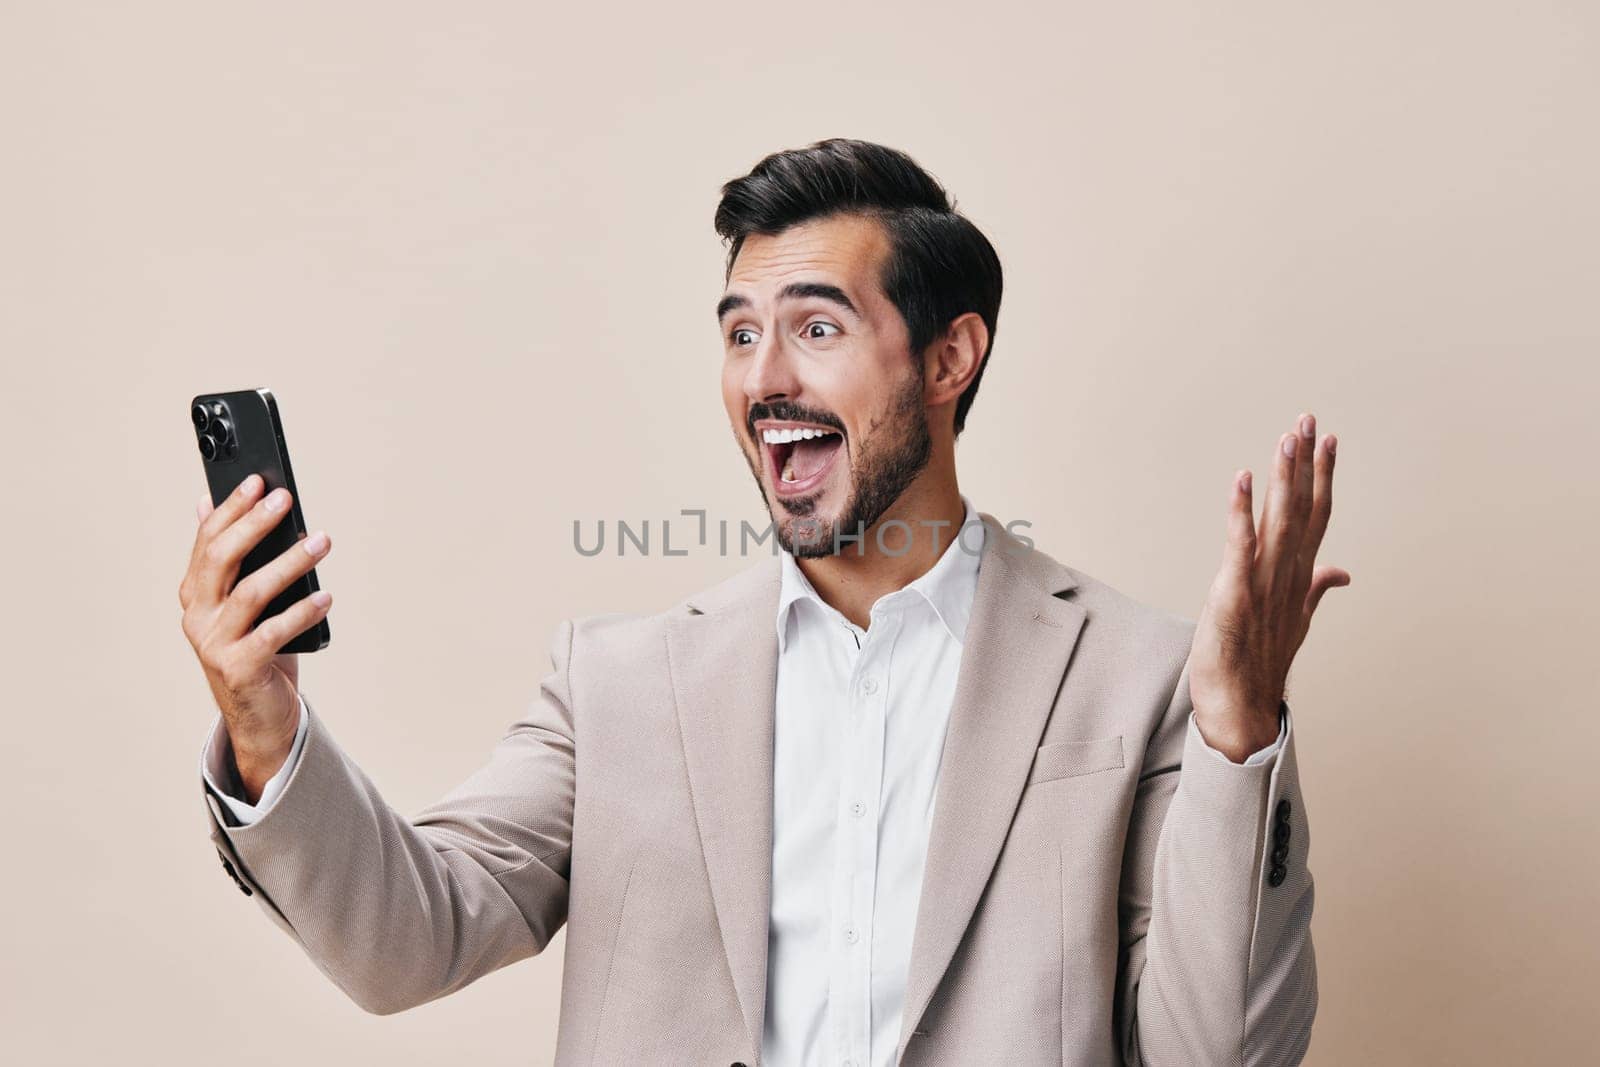 man smile happy portrait business suit hold cellphone smartphone phone call by SHOTPRIME